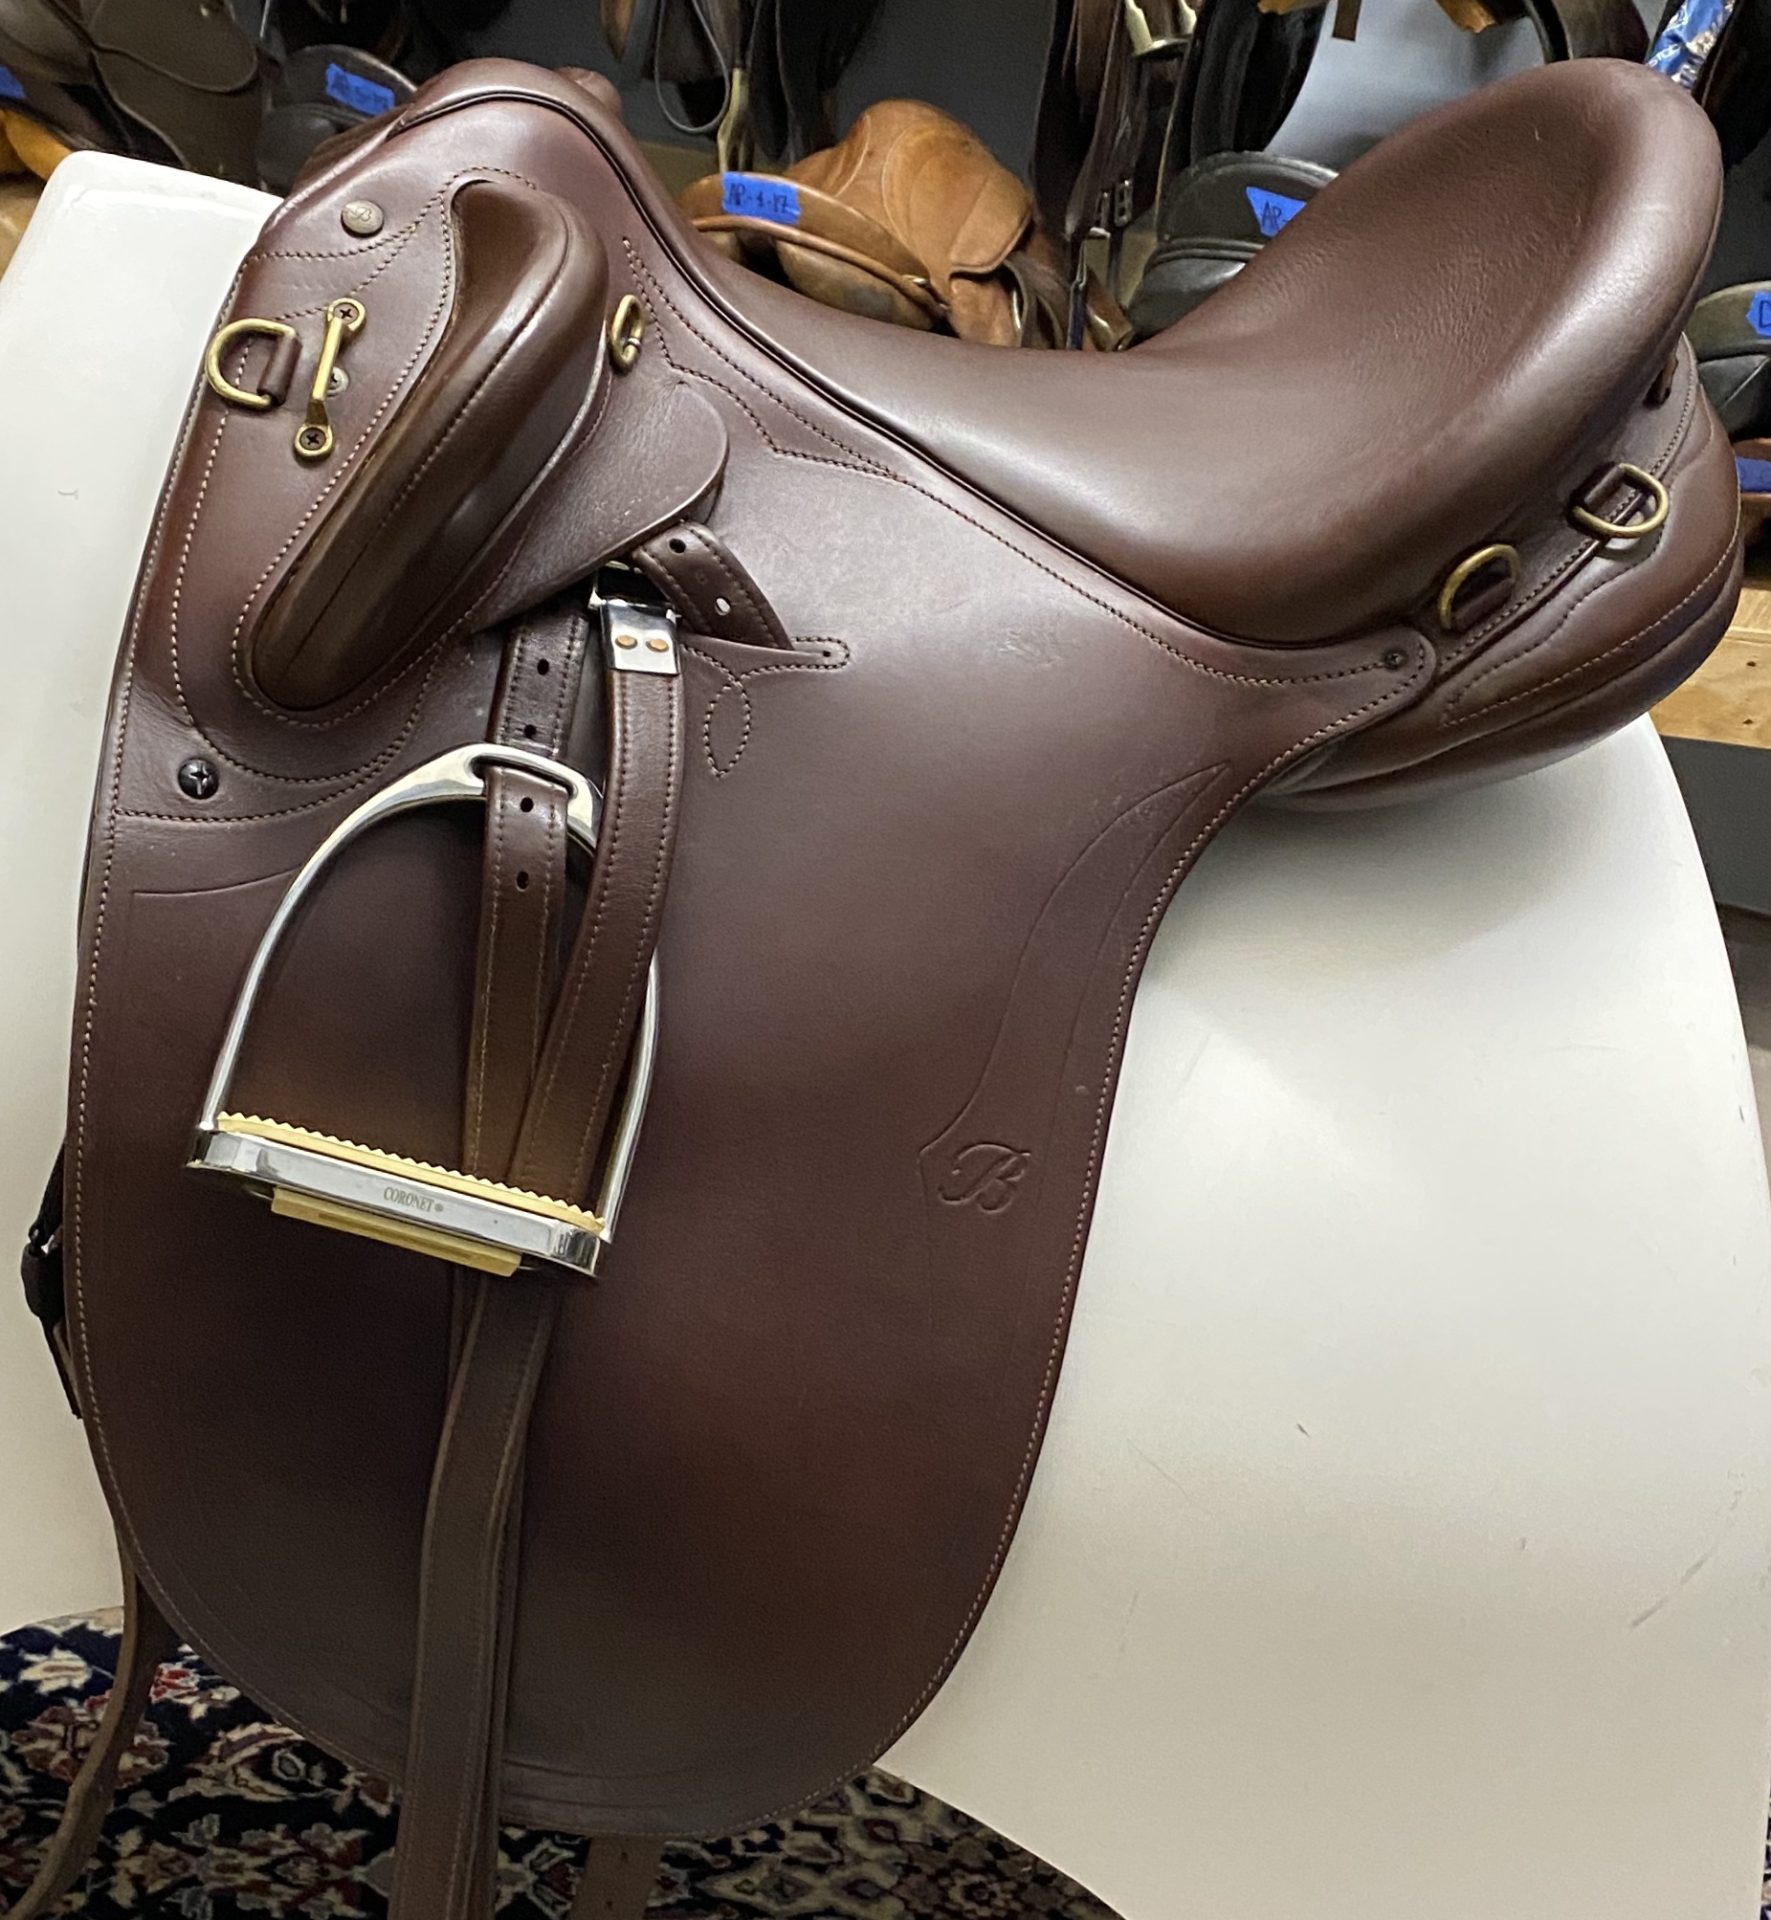 Bates Outback Heritage Saddle CAIR 